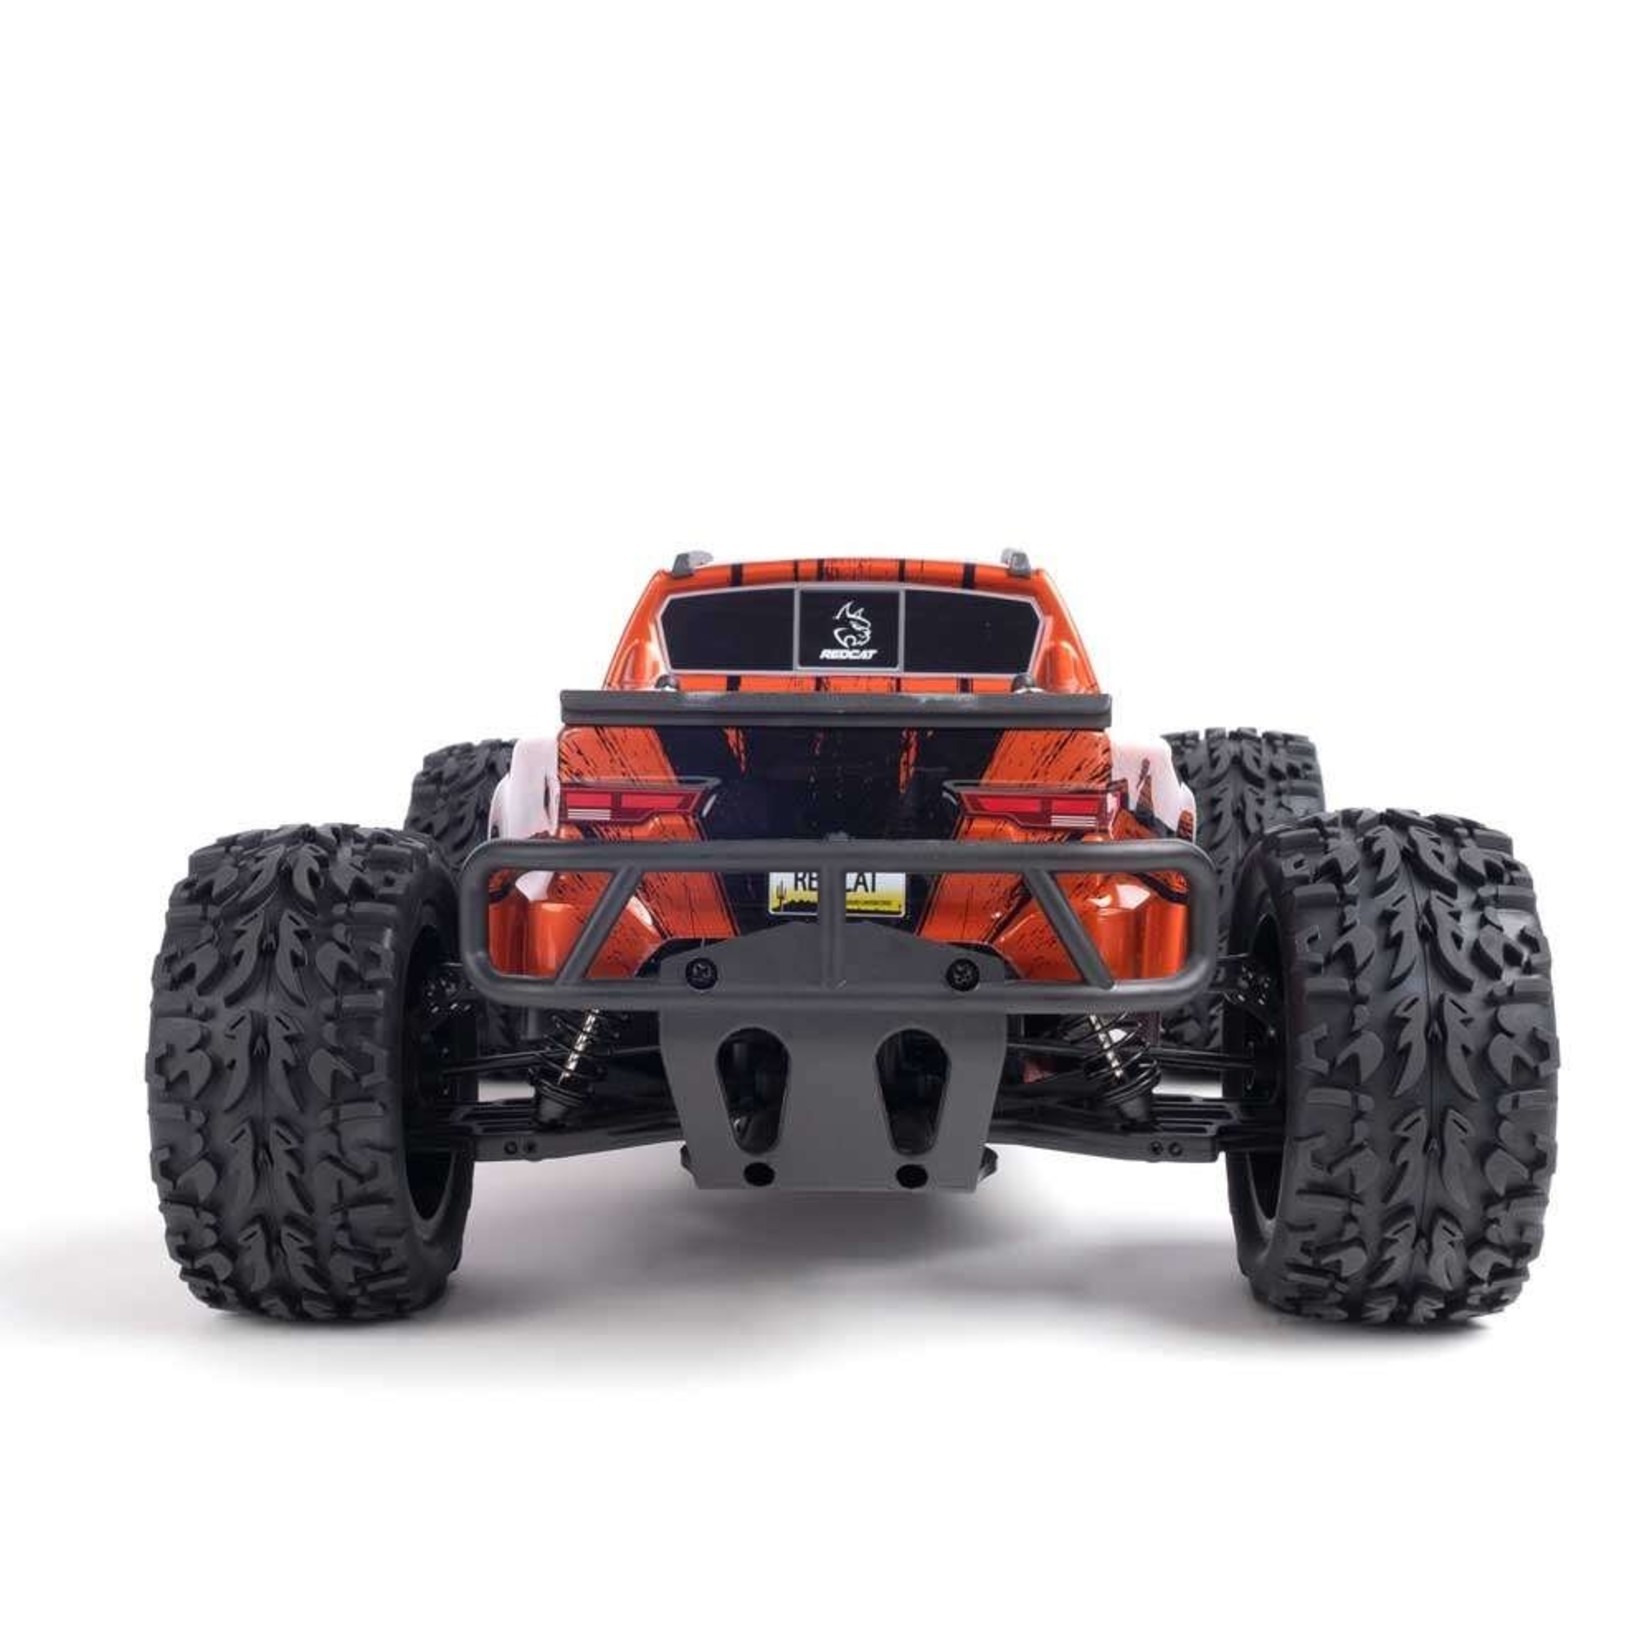 REDCAT Volcano EPX PRO  Copper Truck 1/10 Scale Brushless Electric  No battery No charger